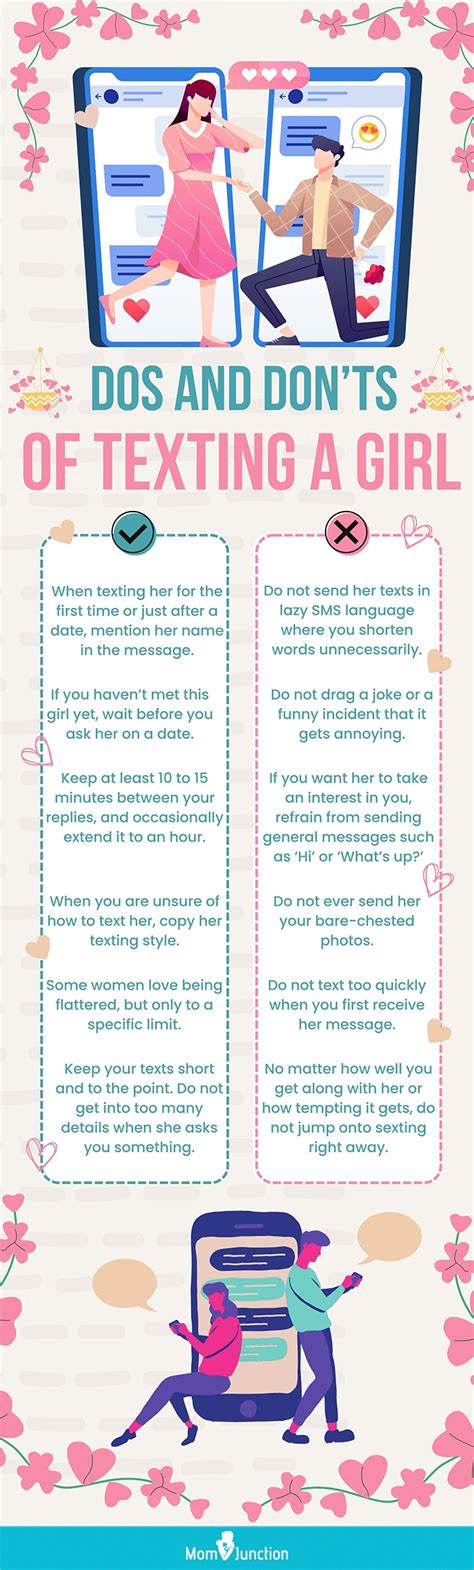 dating text how often